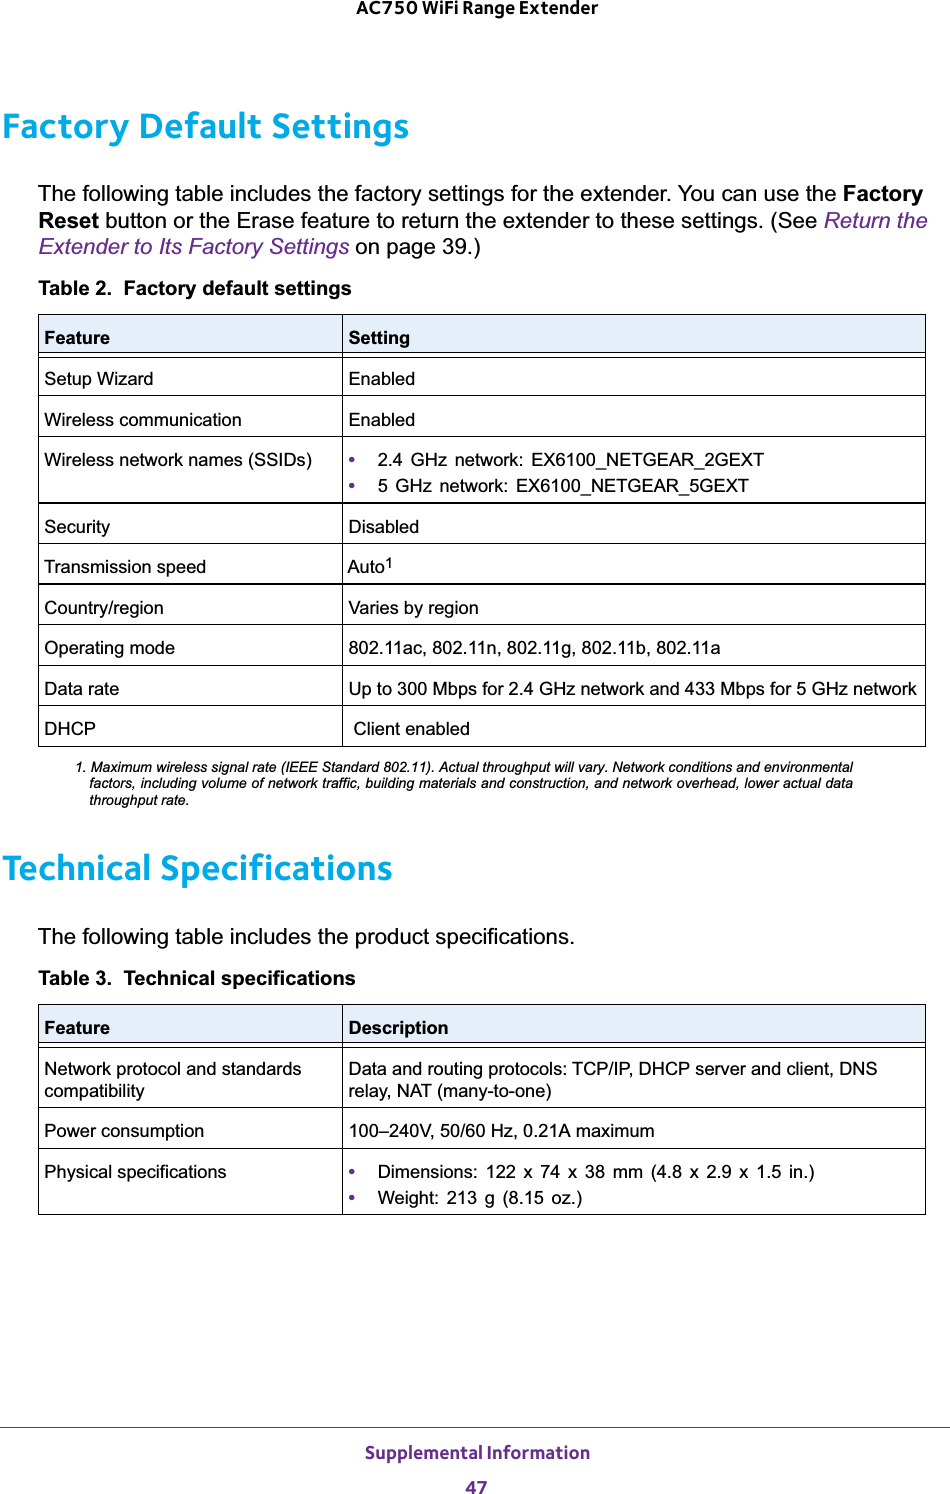  Supplemental Information47 AC750 WiFi Range ExtenderFactory Default SettingsThe following table includes the factory settings for the extender. You can use the Factory Reset button or the Erase feature to return the extender to these settings. (See Return the Extender to Its Factory Settings on page 39.)Table 2.  Factory default settingsFeature SettingSetup Wizard EnabledWireless communication EnabledWireless network names (SSIDs) •  2.4 GHz network: EX6100_NETGEAR_2GEXT•  5 GHz network: EX6100_NETGEAR_5GEXTSecurity DisabledTransmission speed Auto11. Maximum wireless signal rate (IEEE Standard 802.11). Actual throughput will vary. Network conditions and environmental factors, including volume of network traffic, building materials and construction, and network overhead, lower actual data throughput rate.Country/region Varies by regionOperating mode 802.11ac, 802.11n, 802.11g, 802.11b, 802.11aData rate Up to 300 Mbps for 2.4 GHz network and 433 Mbps for 5 GHz networkDHCP  Client enabledTechnical SpecificationsThe following table includes the product specifications.Table 3.  Technical specifications  Feature DescriptionNetwork protocol and standards compatibilityData and routing protocols: TCP/IP, DHCP server and client, DNS relay, NAT (many-to-one)Power consumption 100–240V, 50/60 Hz, 0.21A maximumPhysical specifications •  Dimensions: 122 x 74 x 38 mm (4.8 x 2.9 x 1.5 in.)•  Weight: 213 g (8.15 oz.)